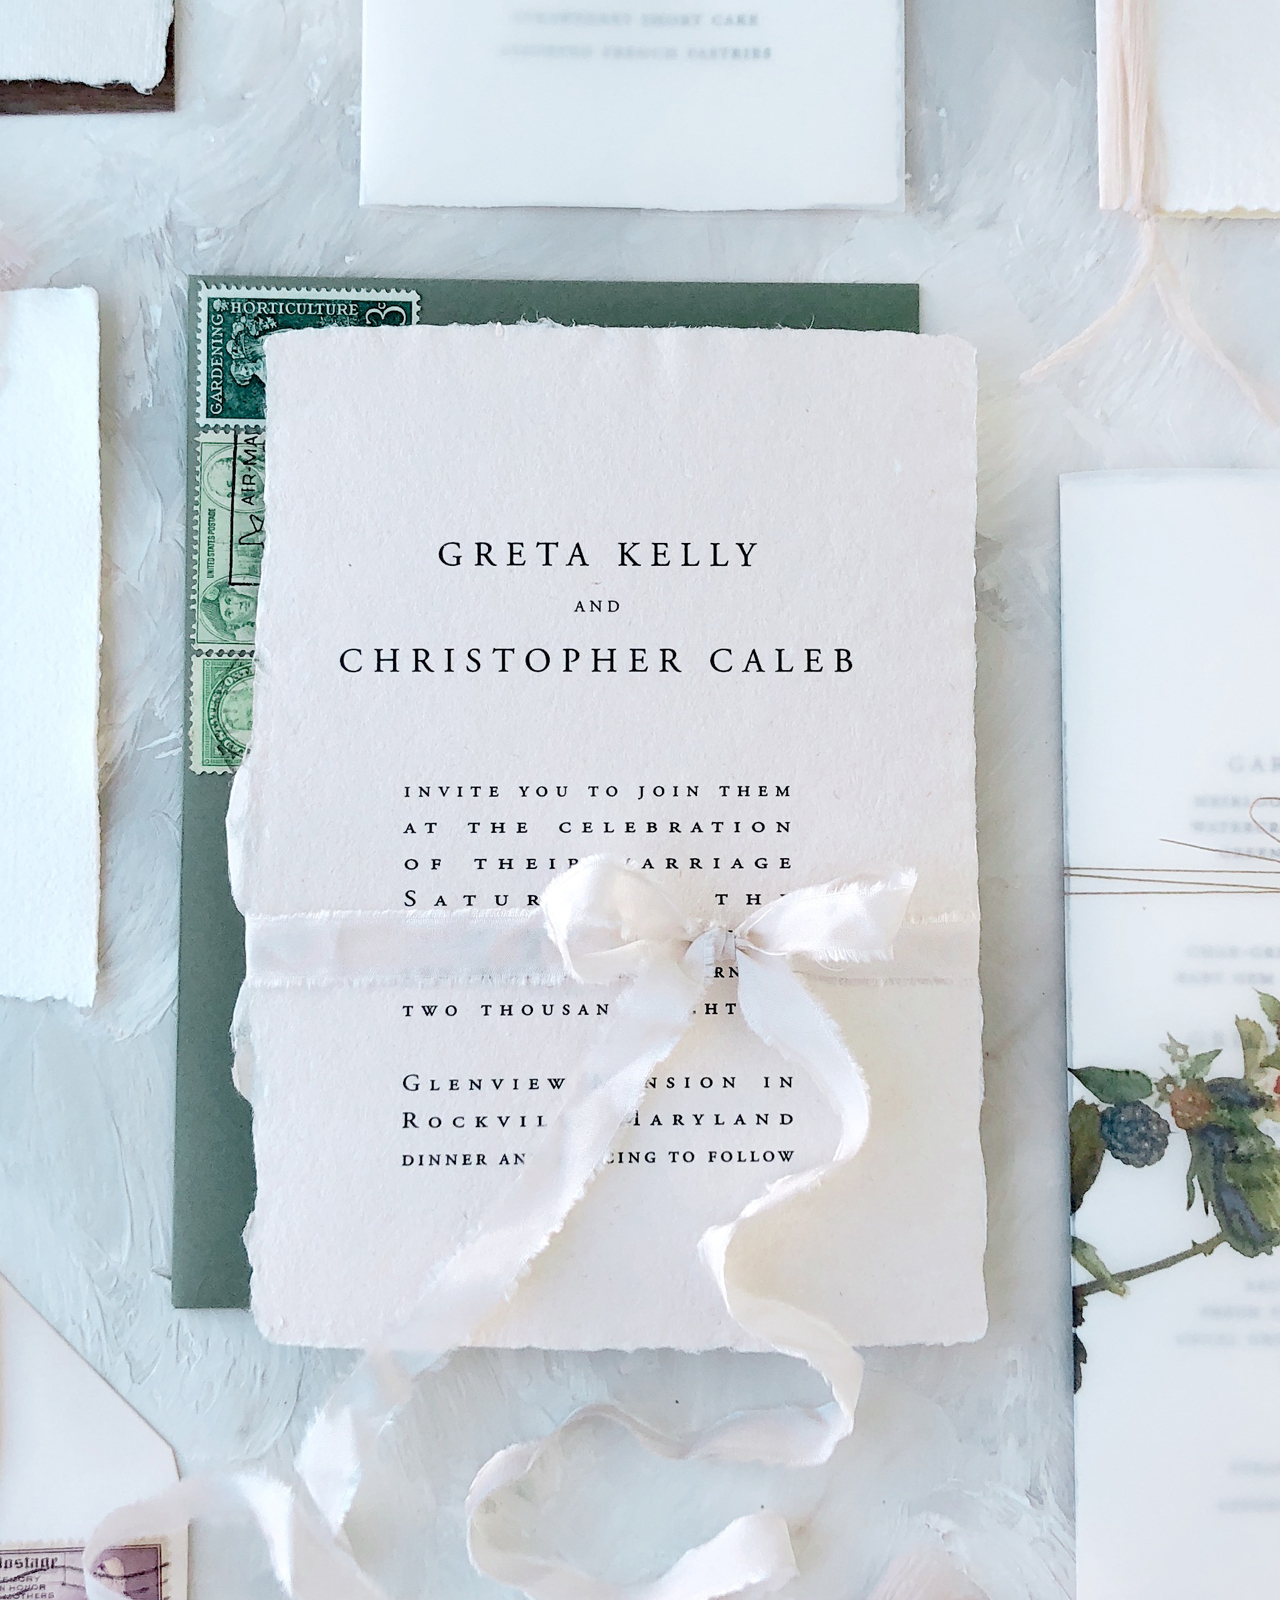 Minimalist Type-Driven Wedding Invitations on Handmade Paper by Every Little Letter